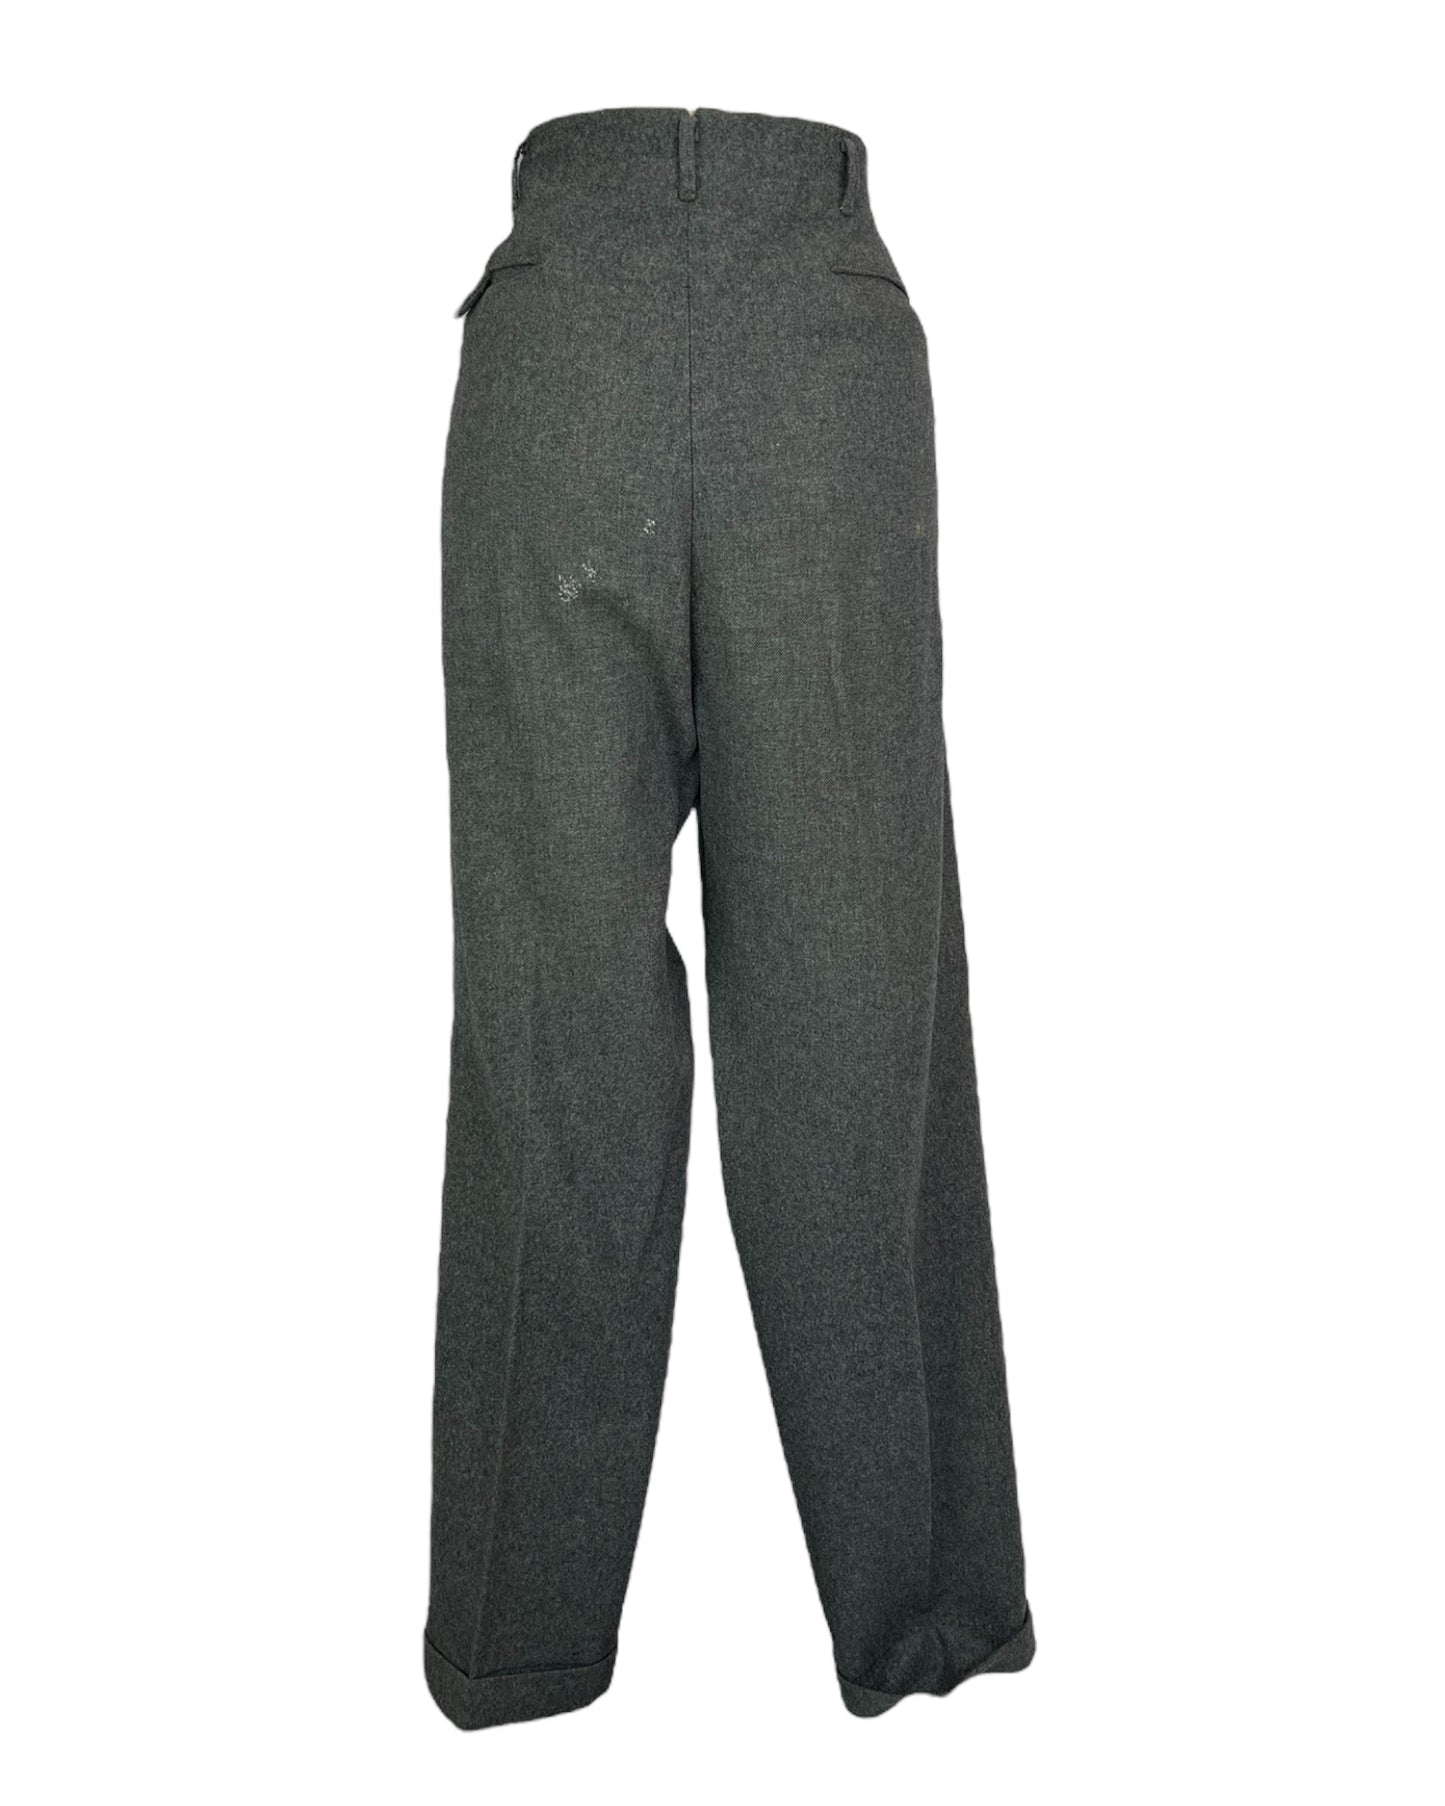 1950s Wooly Professor Trousers*